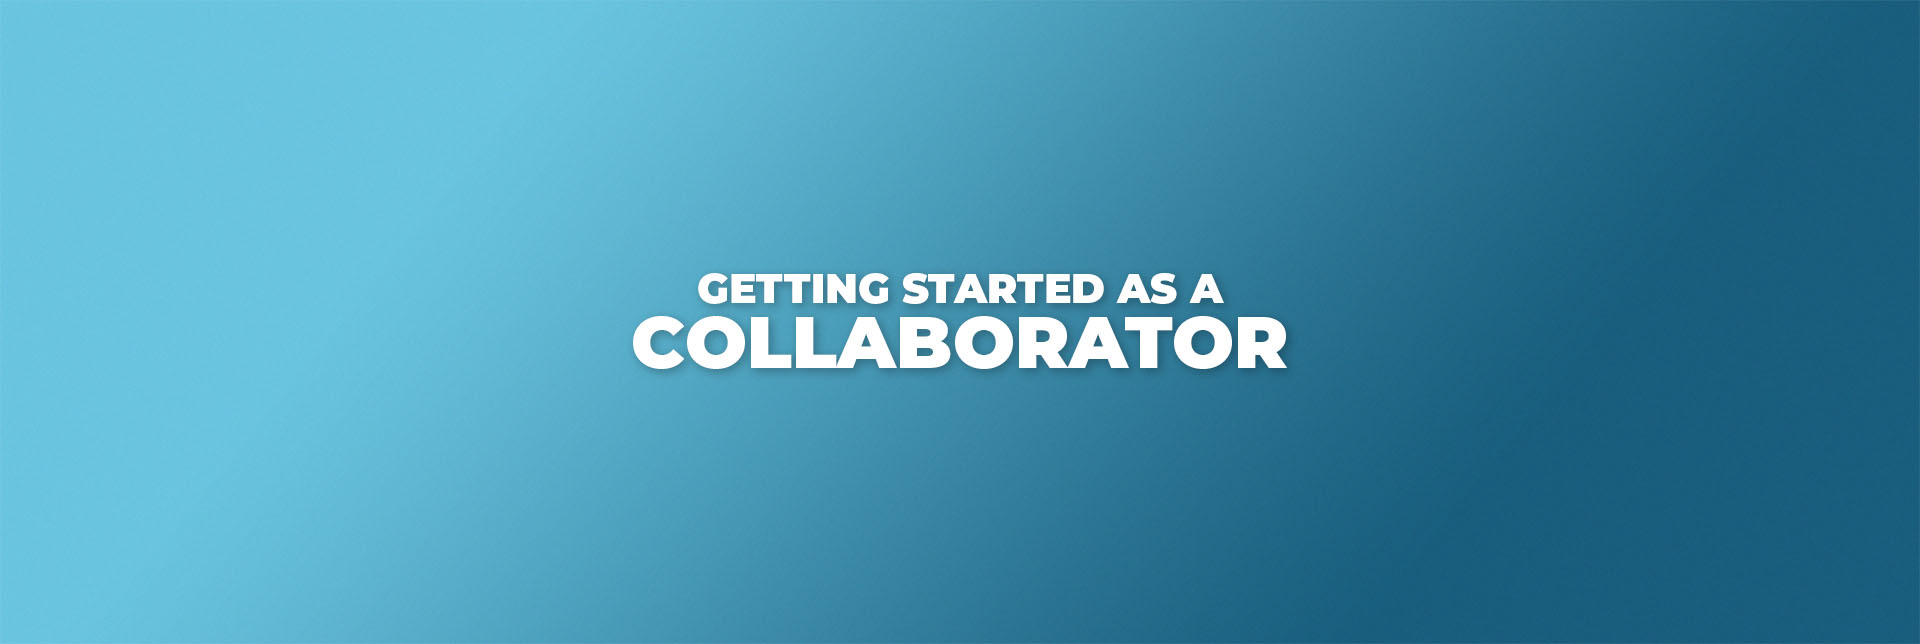 Getting Started as a Collaborator